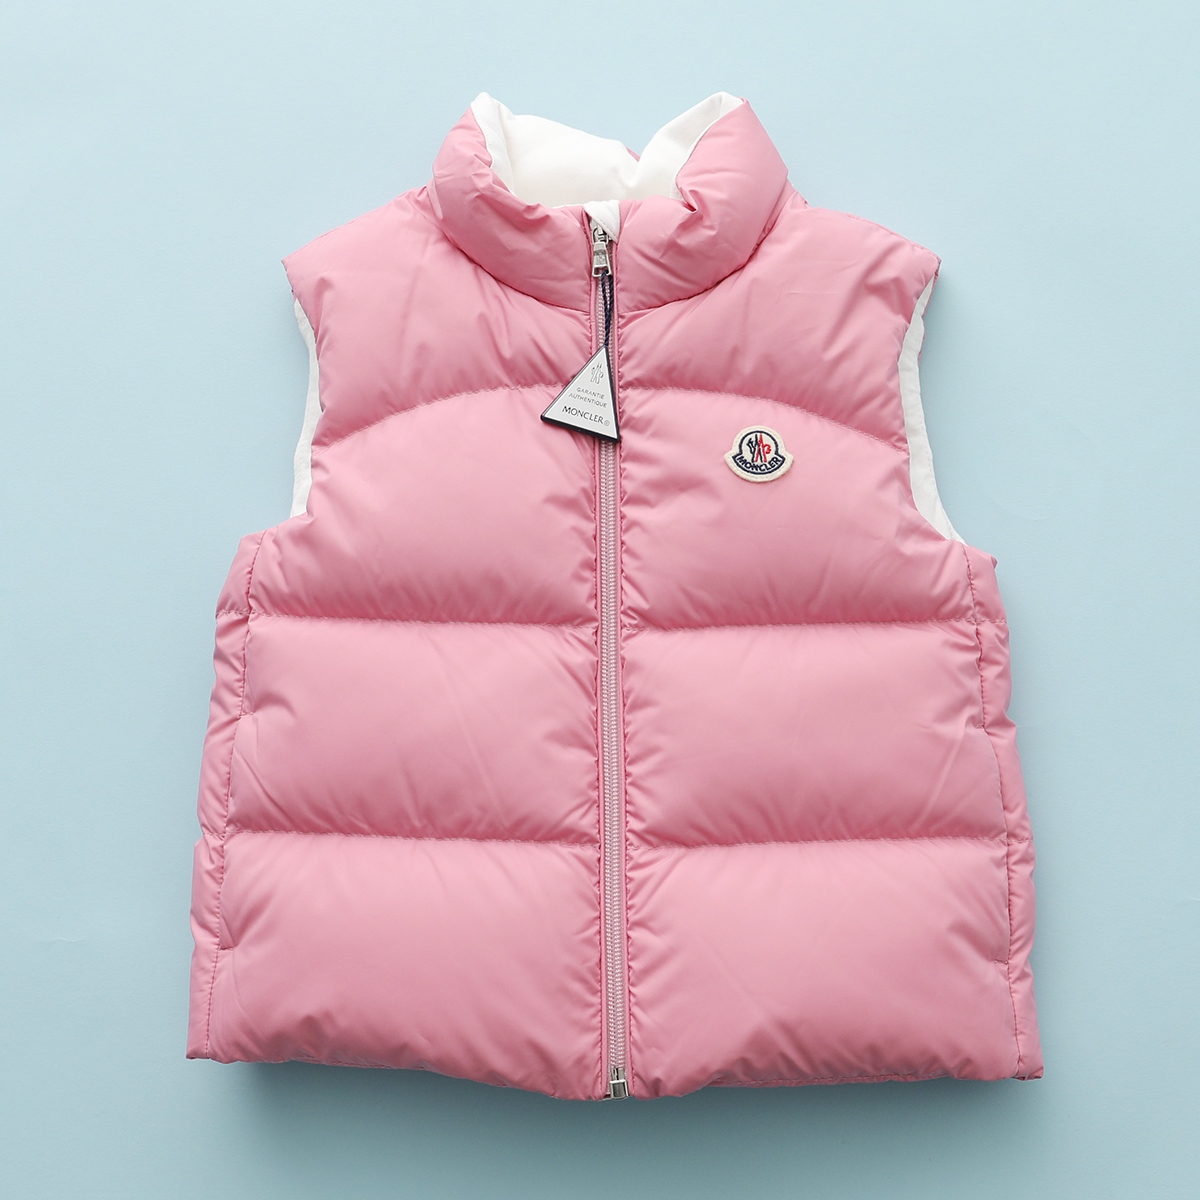 MONCLER KIDS モンクレール キッズ ダウンベスト LIDA GILET 1A00014 ...